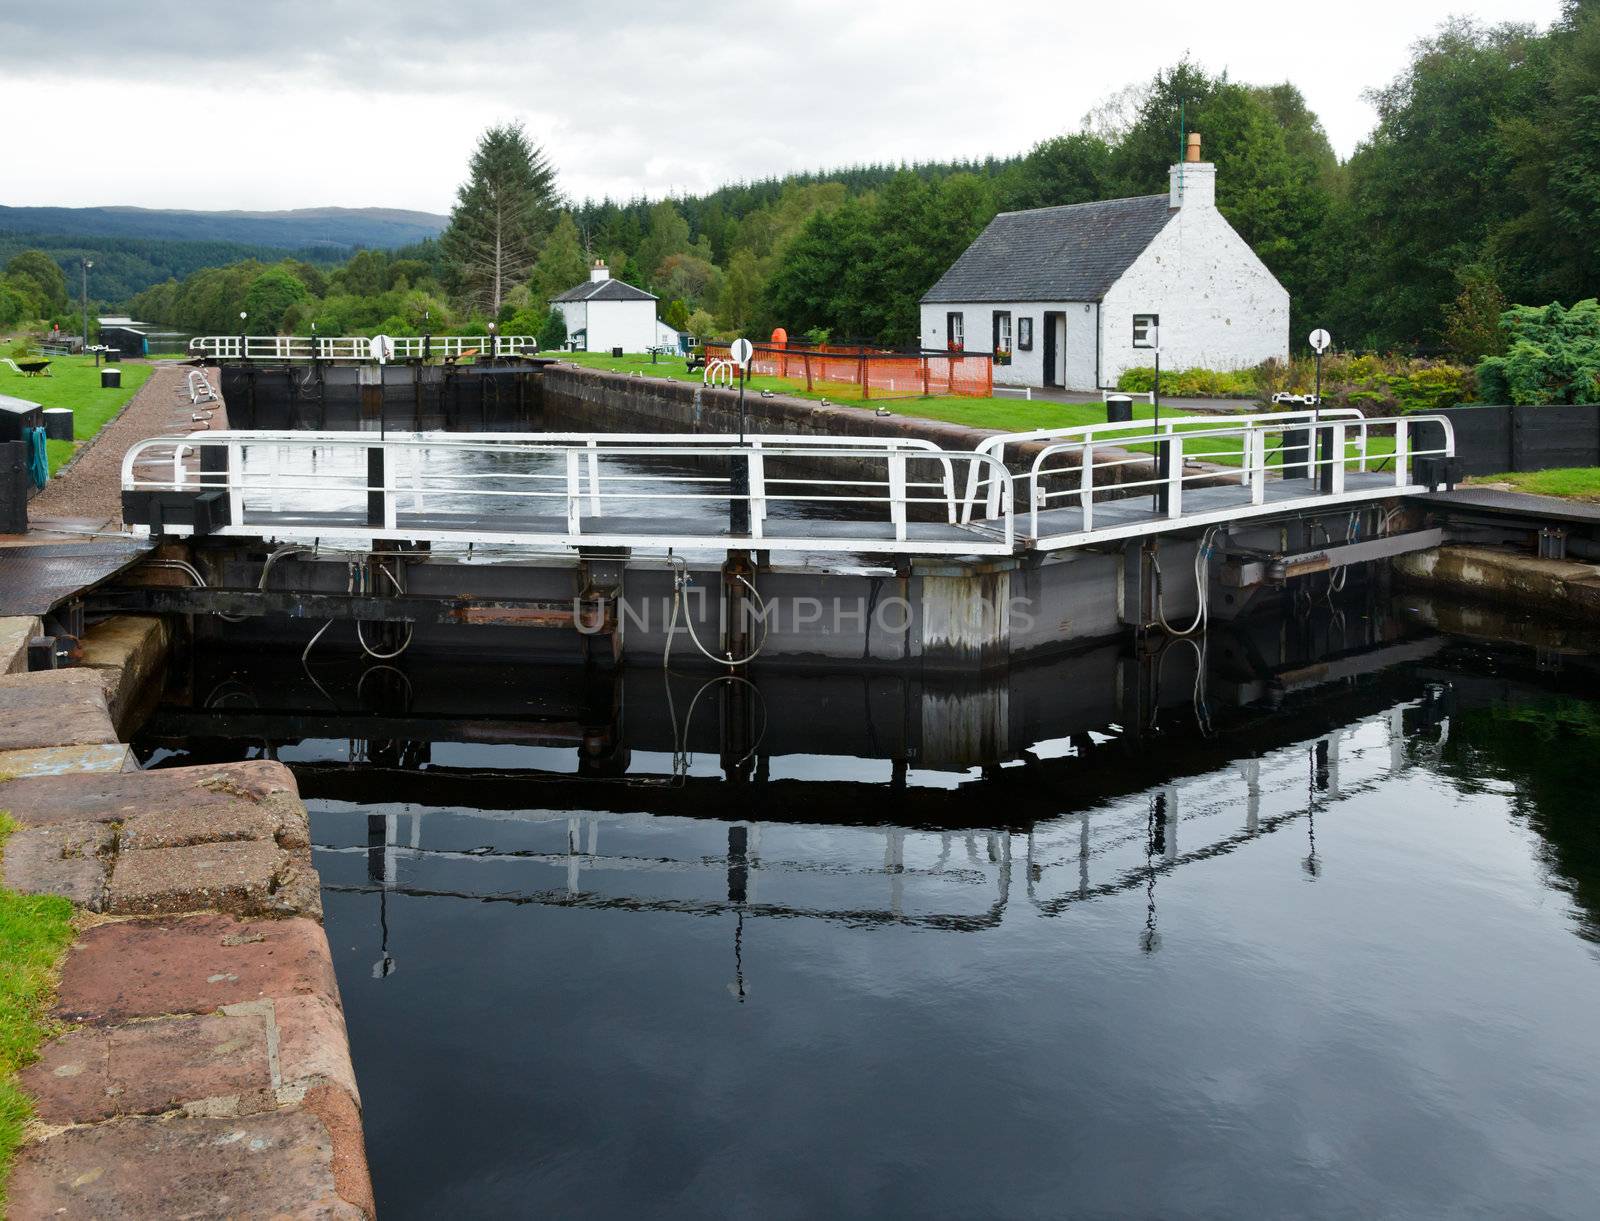 Cullochy Lock on the Caledonian Canal in Scotland